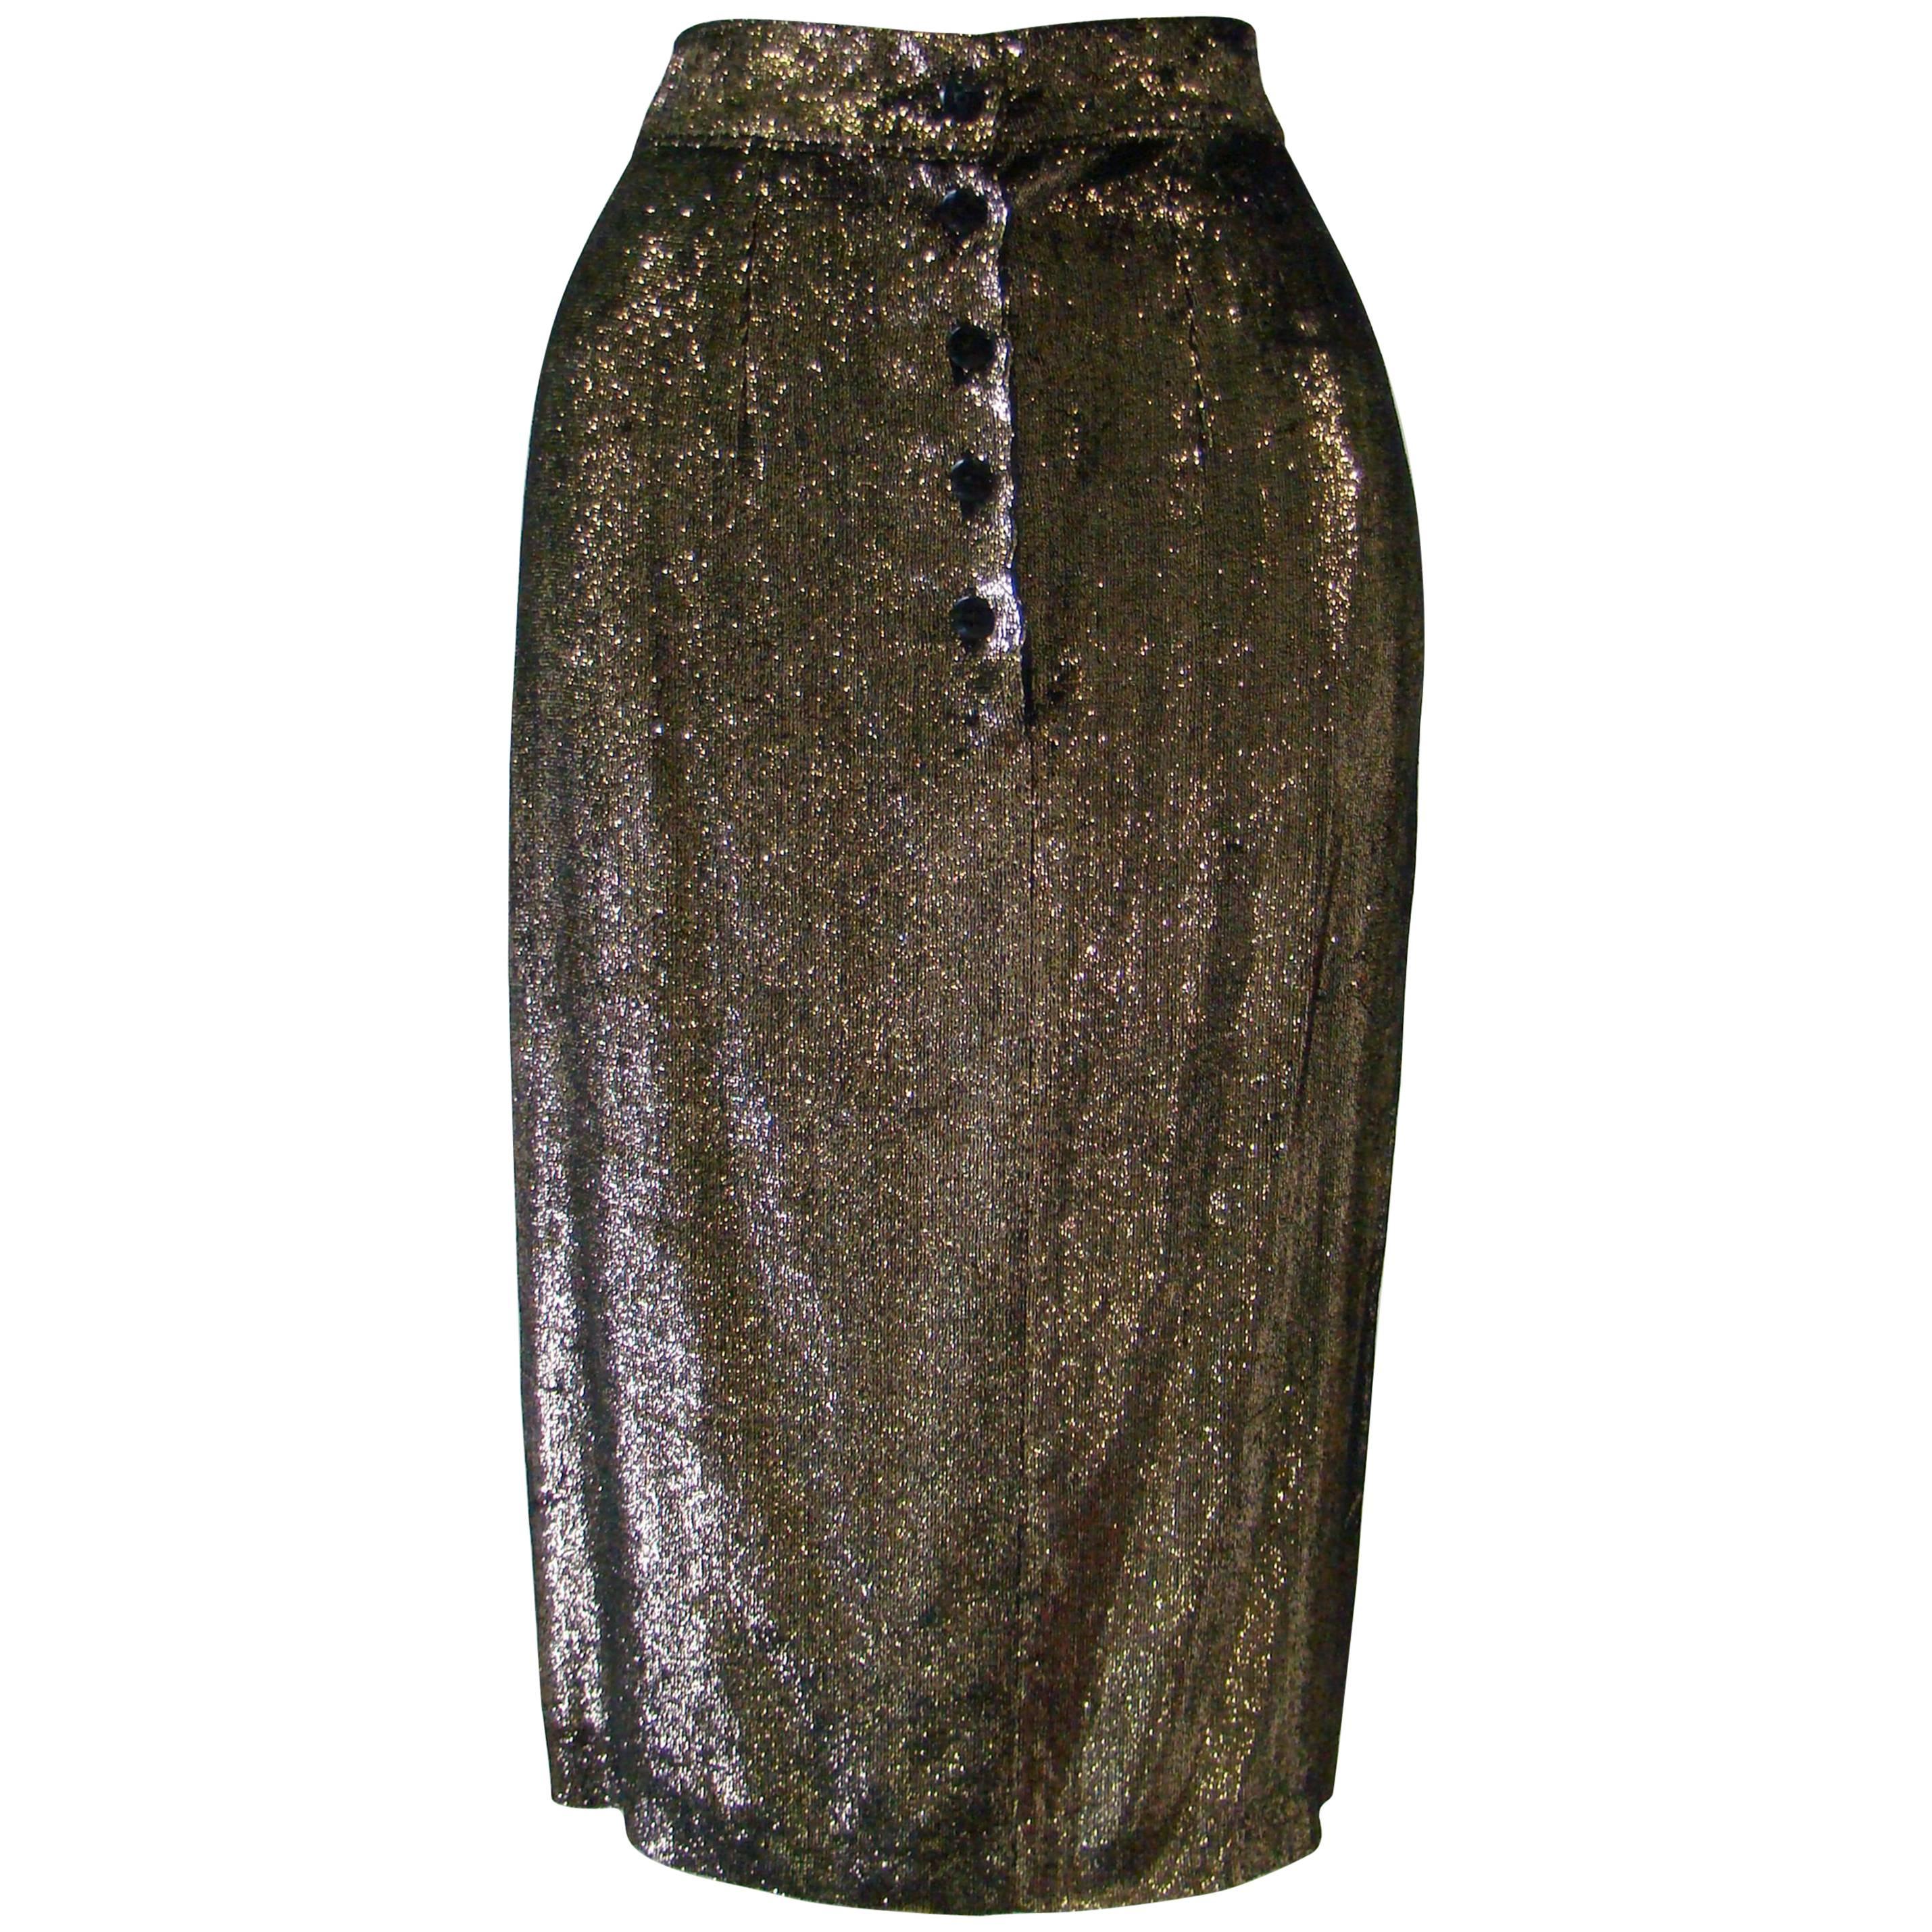 Istante By Gianni Versace Gold Lame Skirt Fall 1986 For Sale